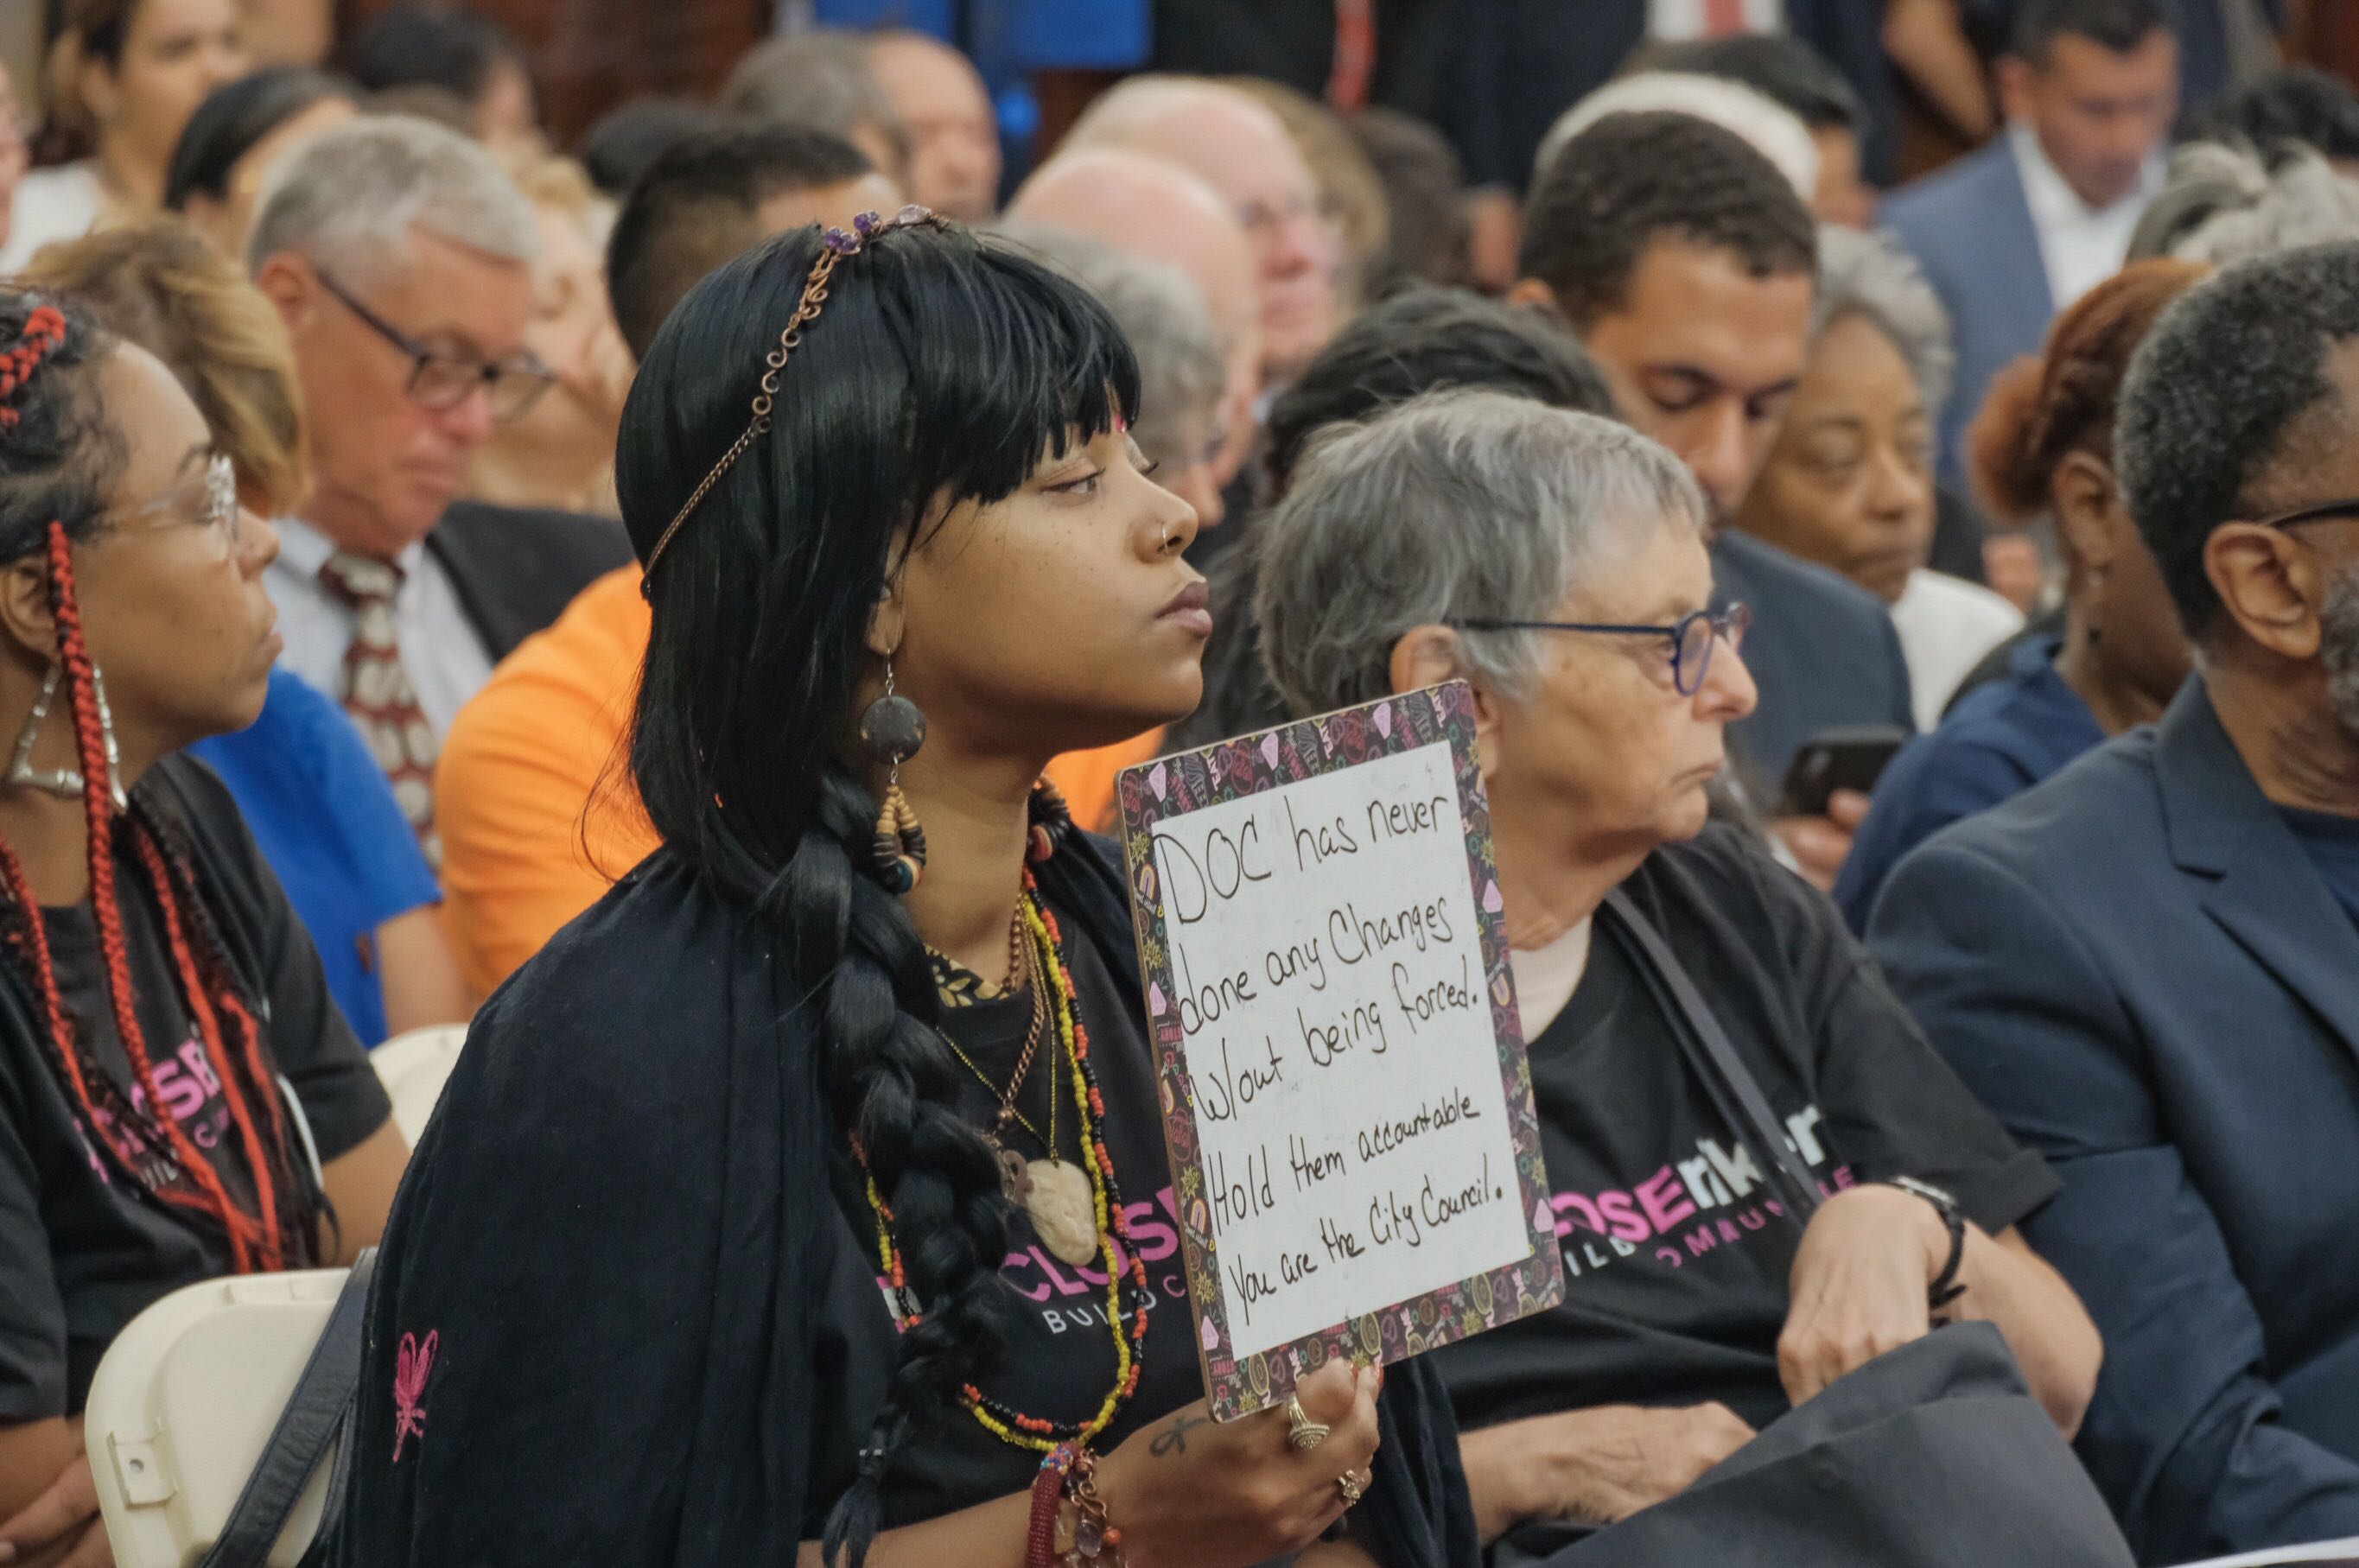 An activist at a Sept. 5 City Hall hearing on borough-based jails.